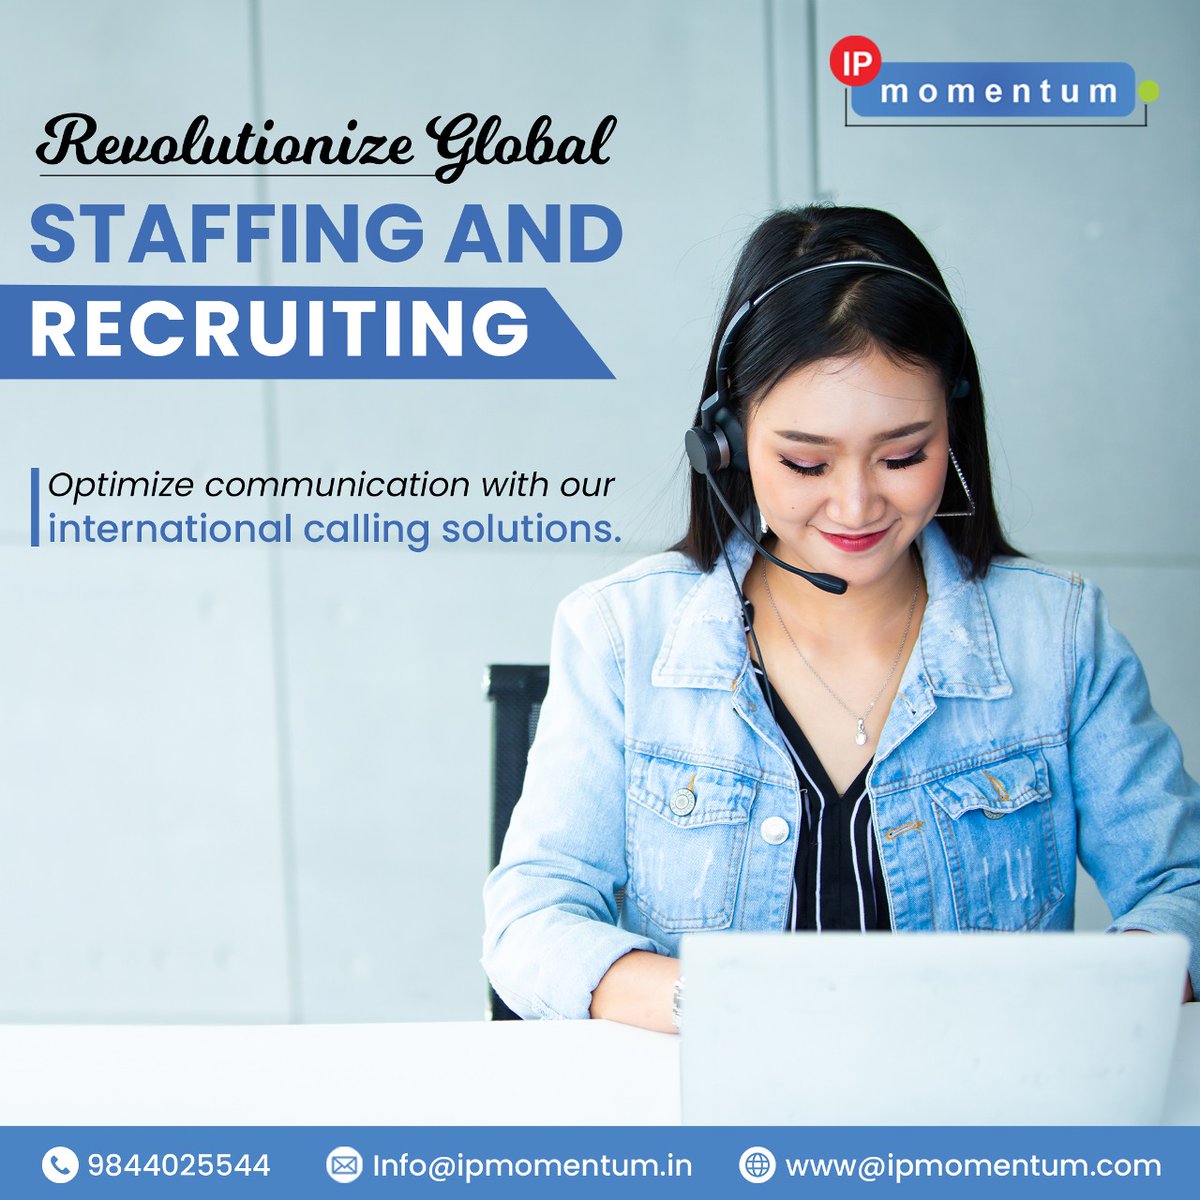 Revolutionize global hiring! 🌍 Our international calling solutions streamline communication for staffing firms. Foster talent collaboration worldwide and ensure 24/7 support. Explore more at IPMomentum.com #GlobalHiring #StaffingSolutions #TalentAcquisition #IPMomentum